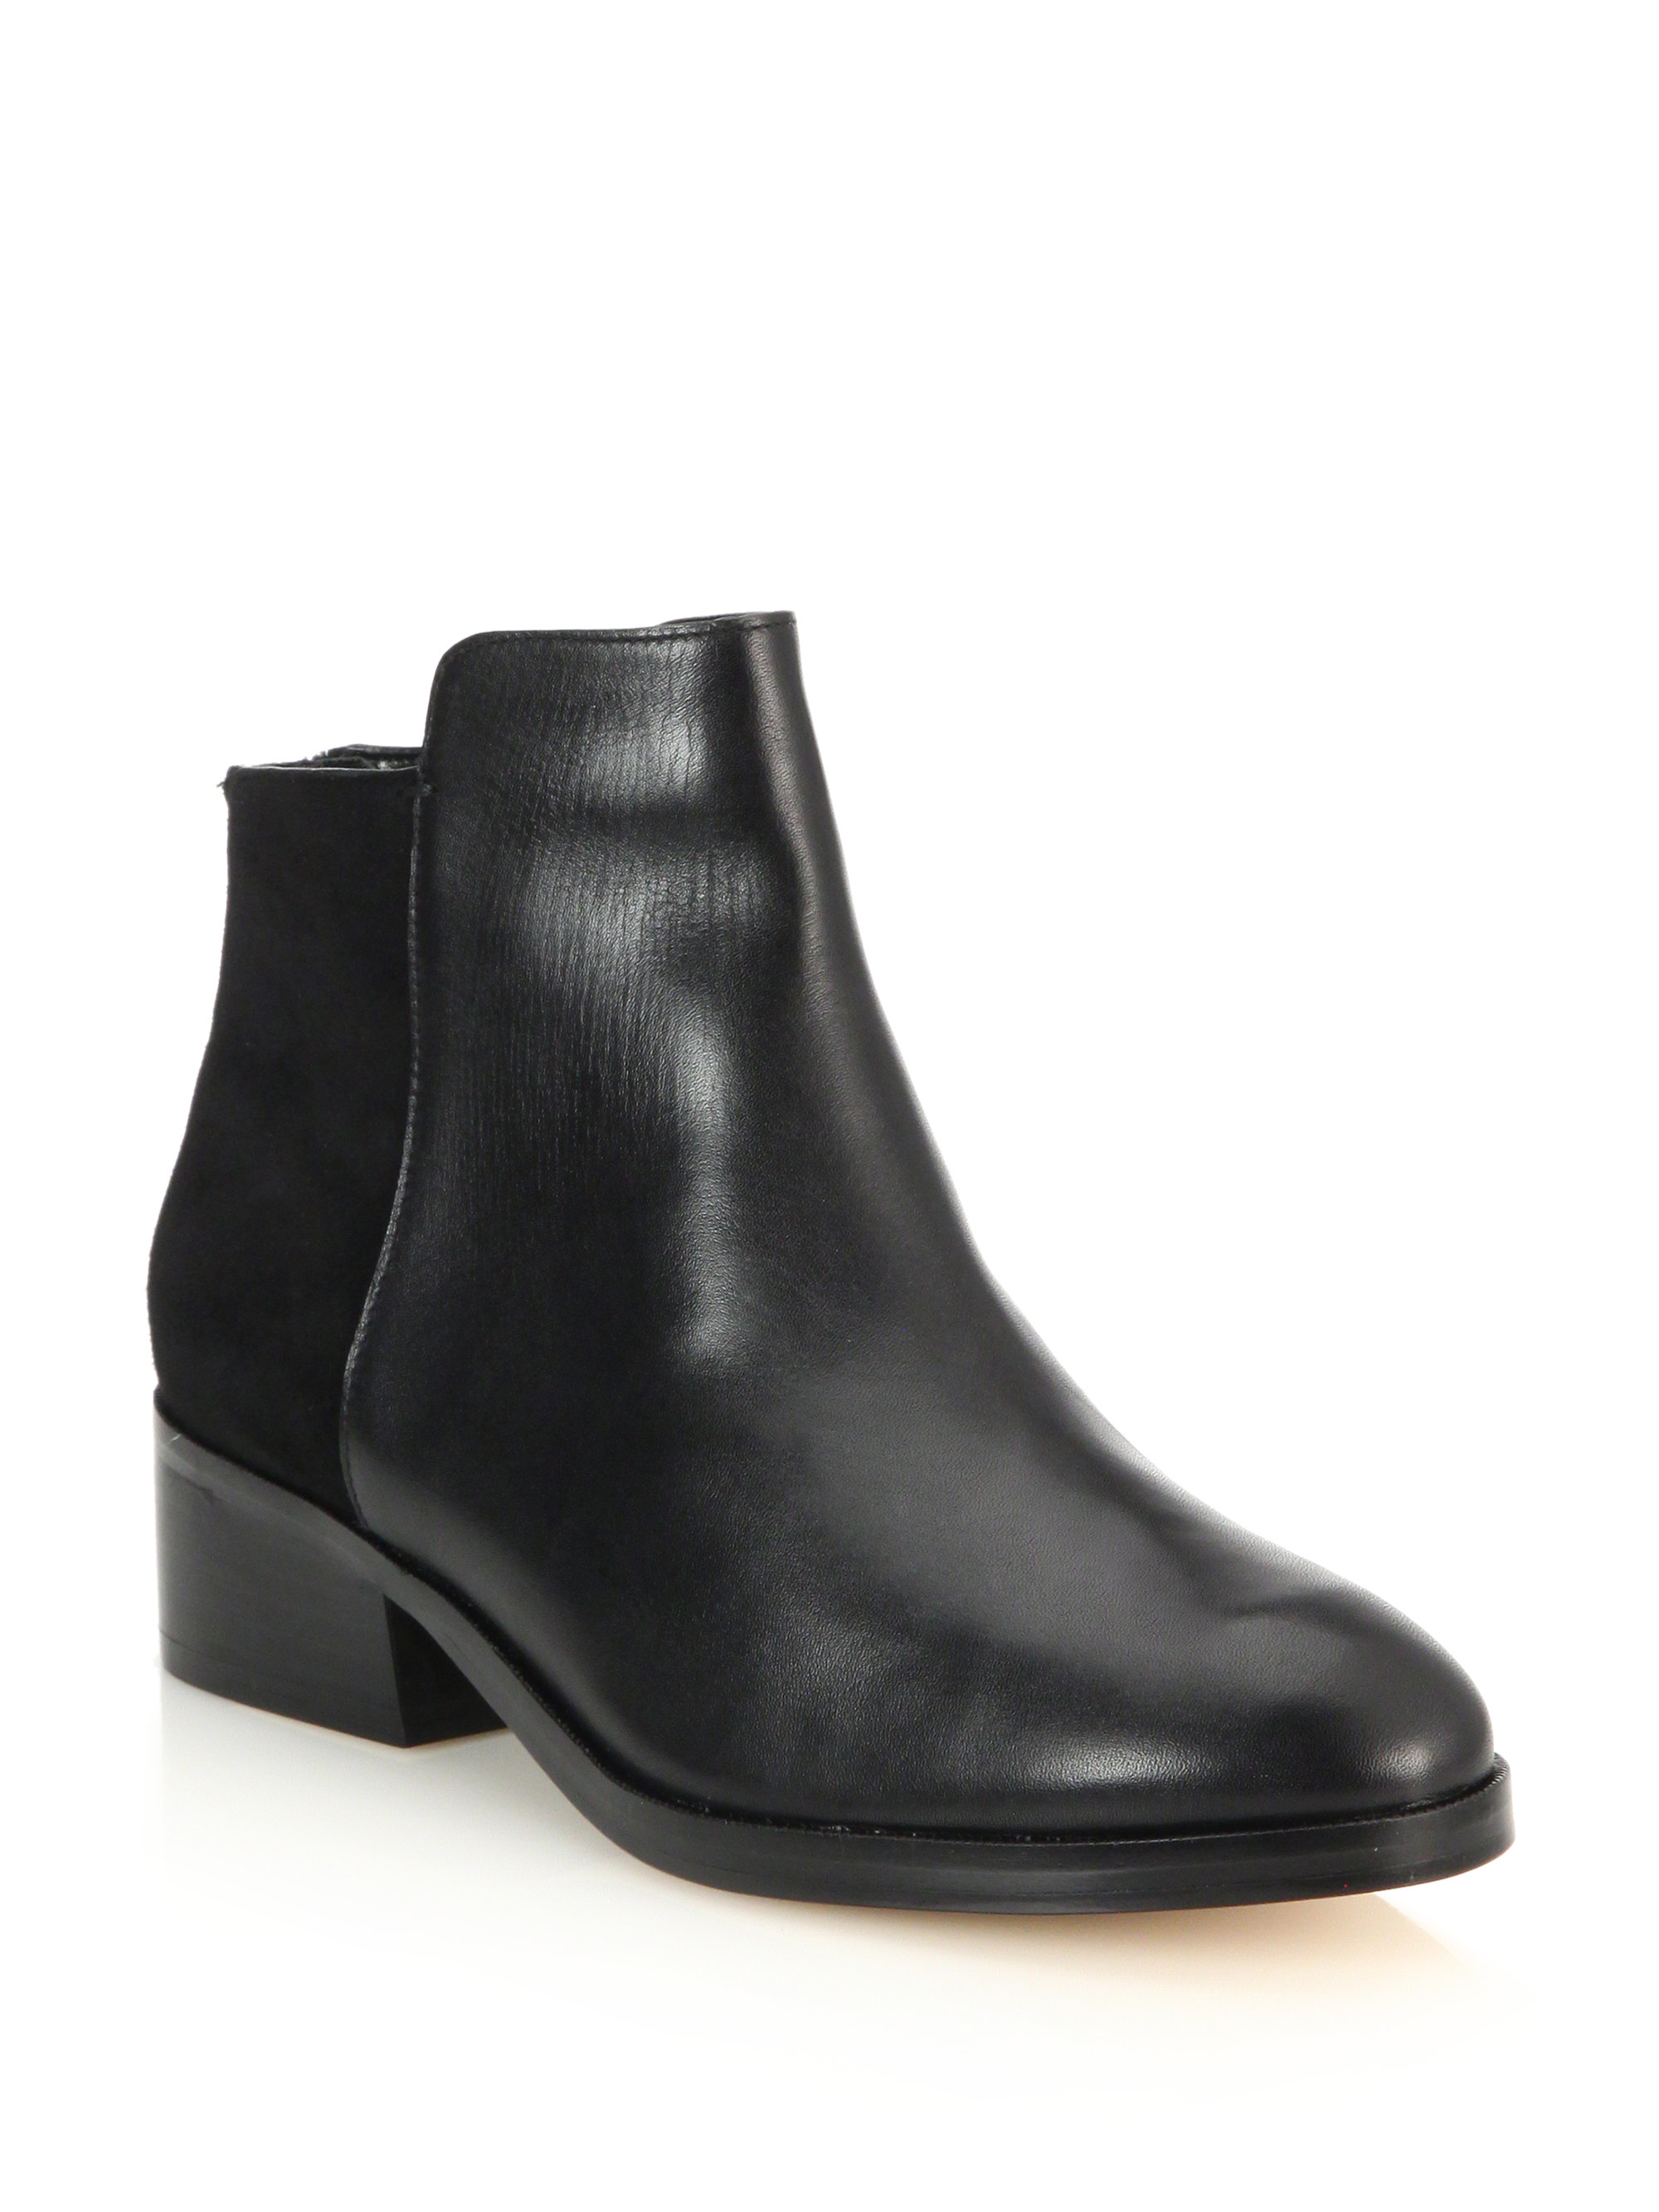 Lyst - Cole Haan Elion Leather & Suede Ankle Boots in Black